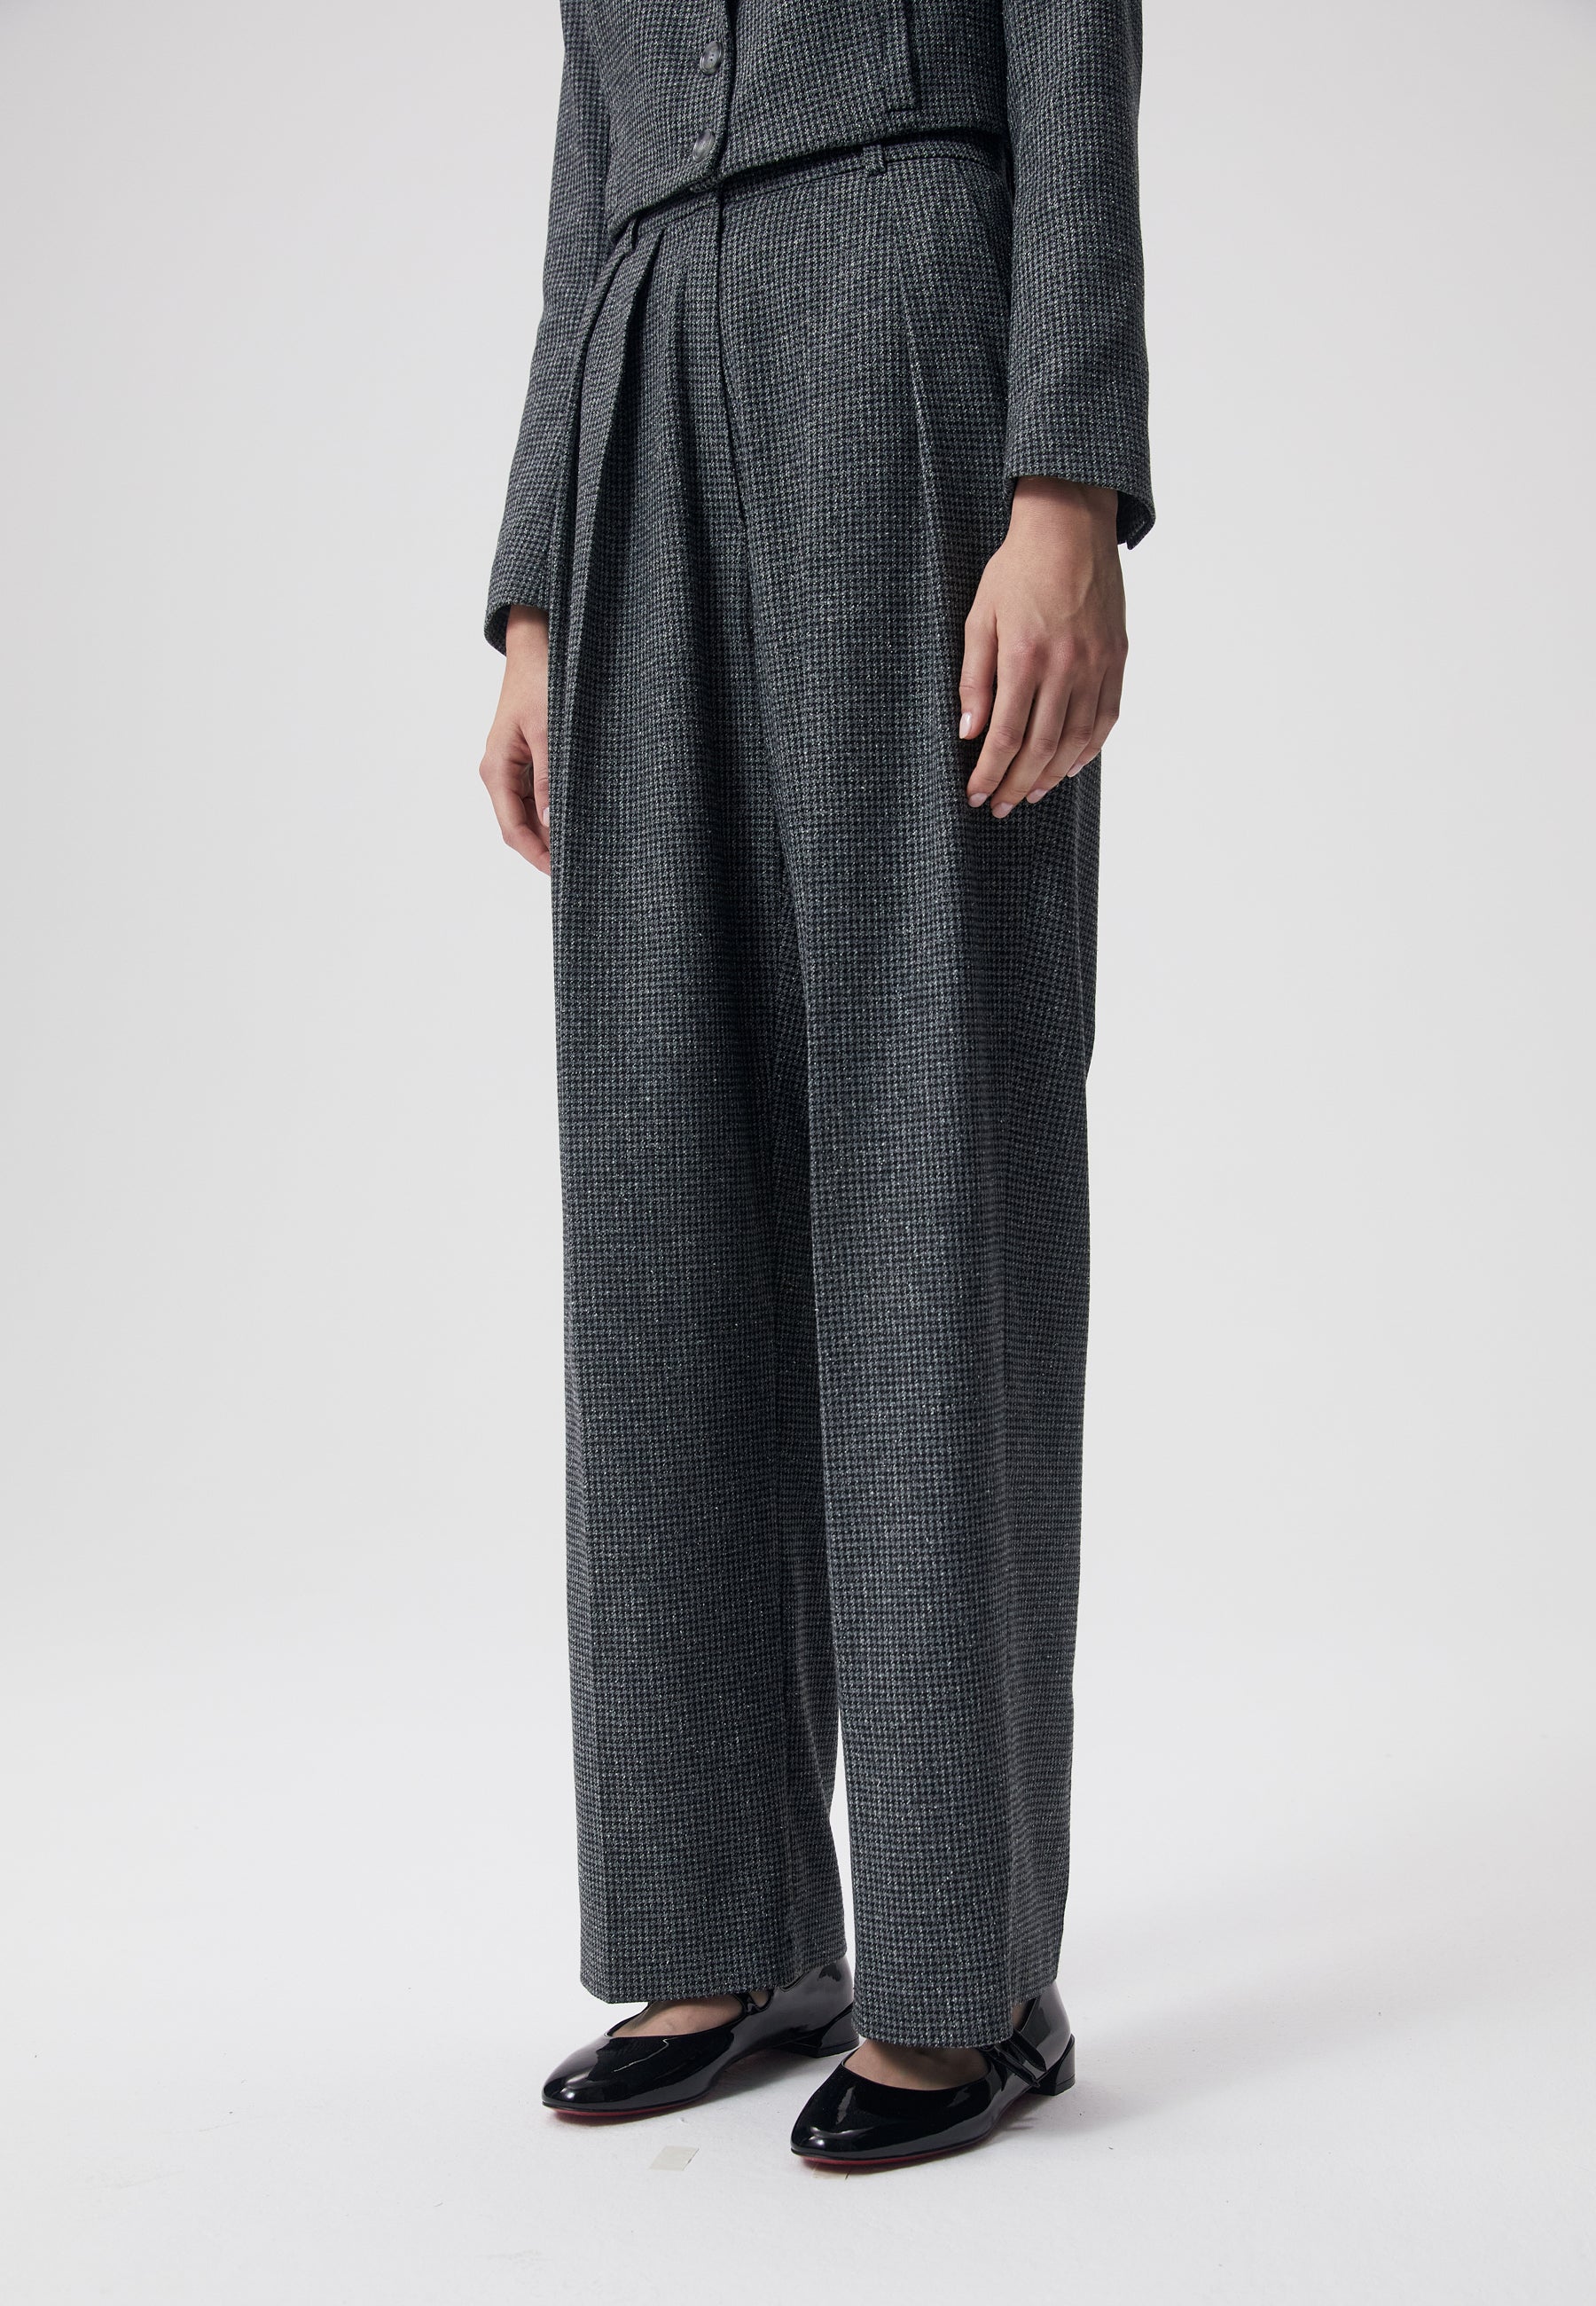 Wide-leg pants in a houndstooth pattern BANOS grey